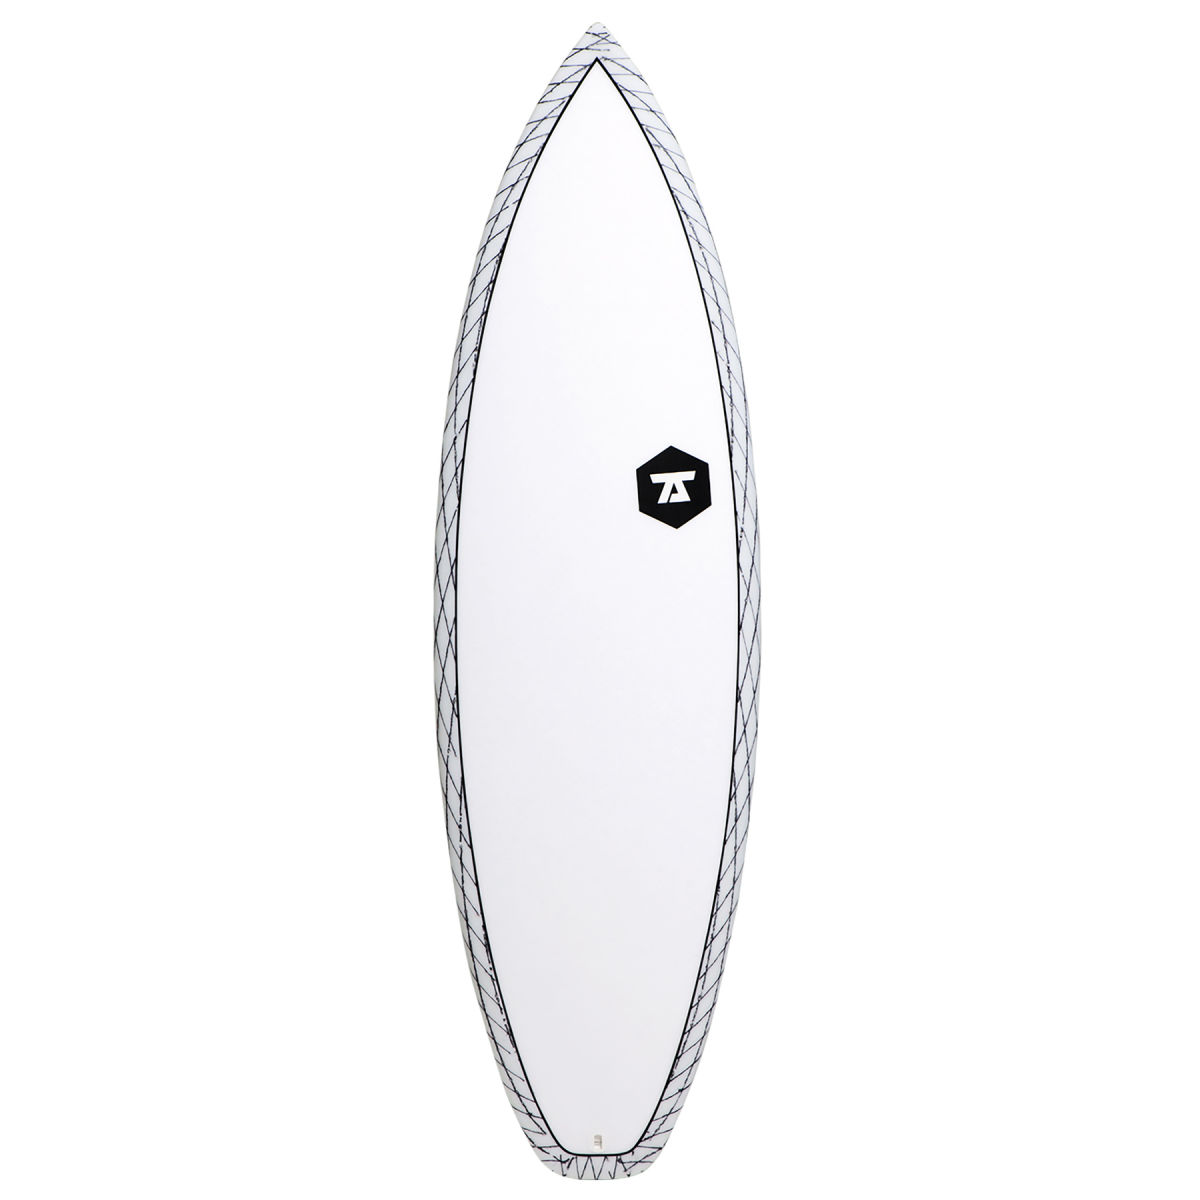 Free Surfboard Clipart Black And White, Download Free Clip.